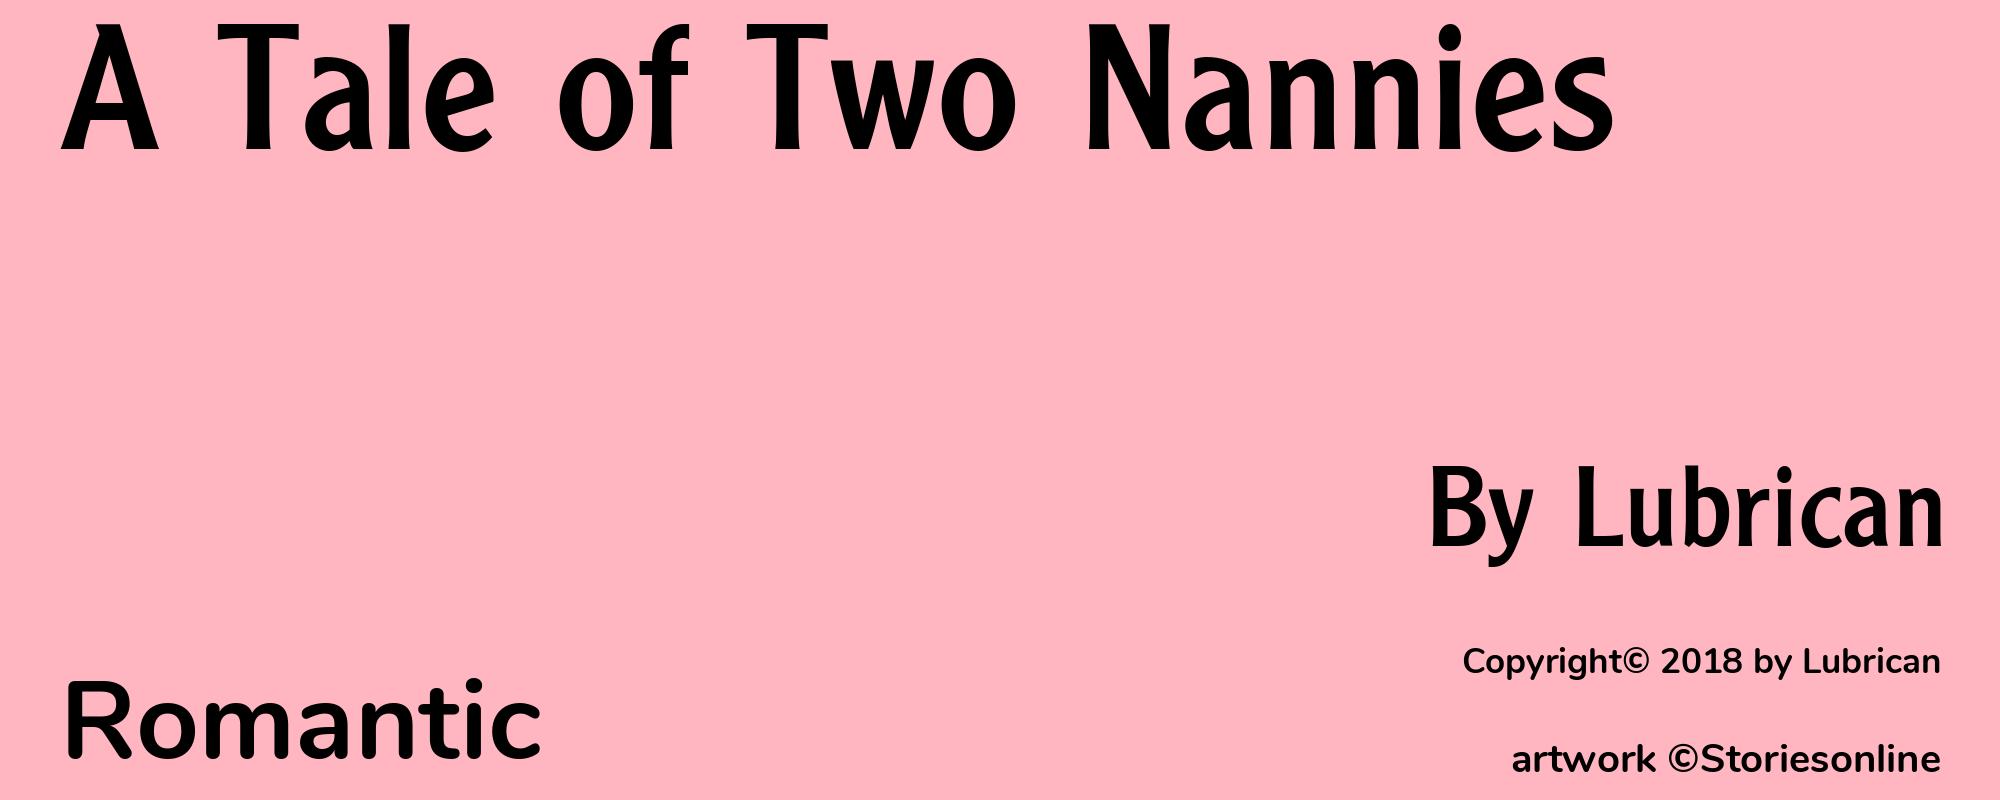 A Tale of Two Nannies - Cover